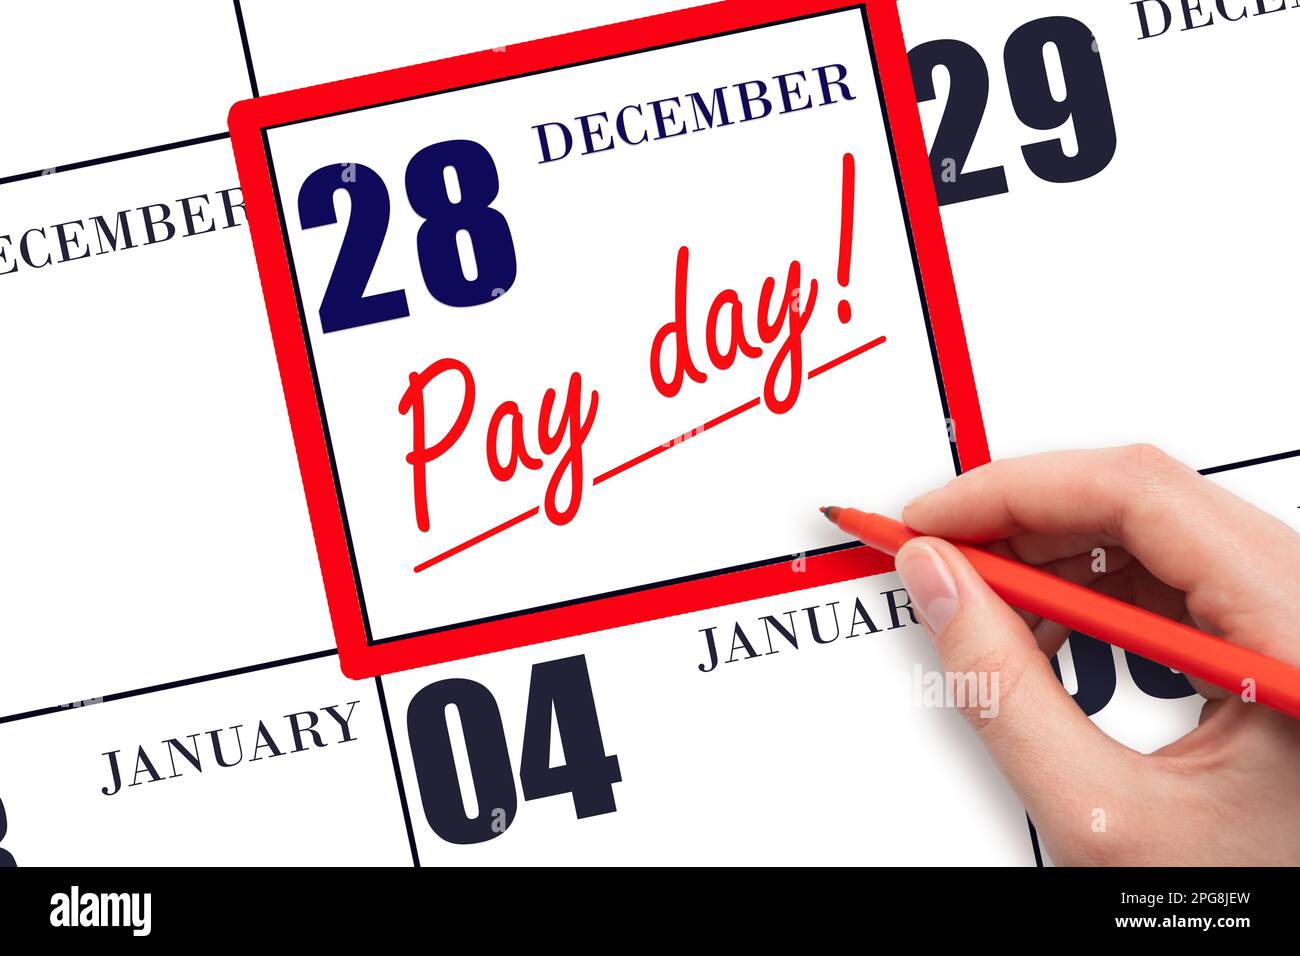 28th day of December. Hand writing text PAY DATE on calendar date December 28 and underline it. Payment due date. Reminder concept of payment. Winter Stock Photo